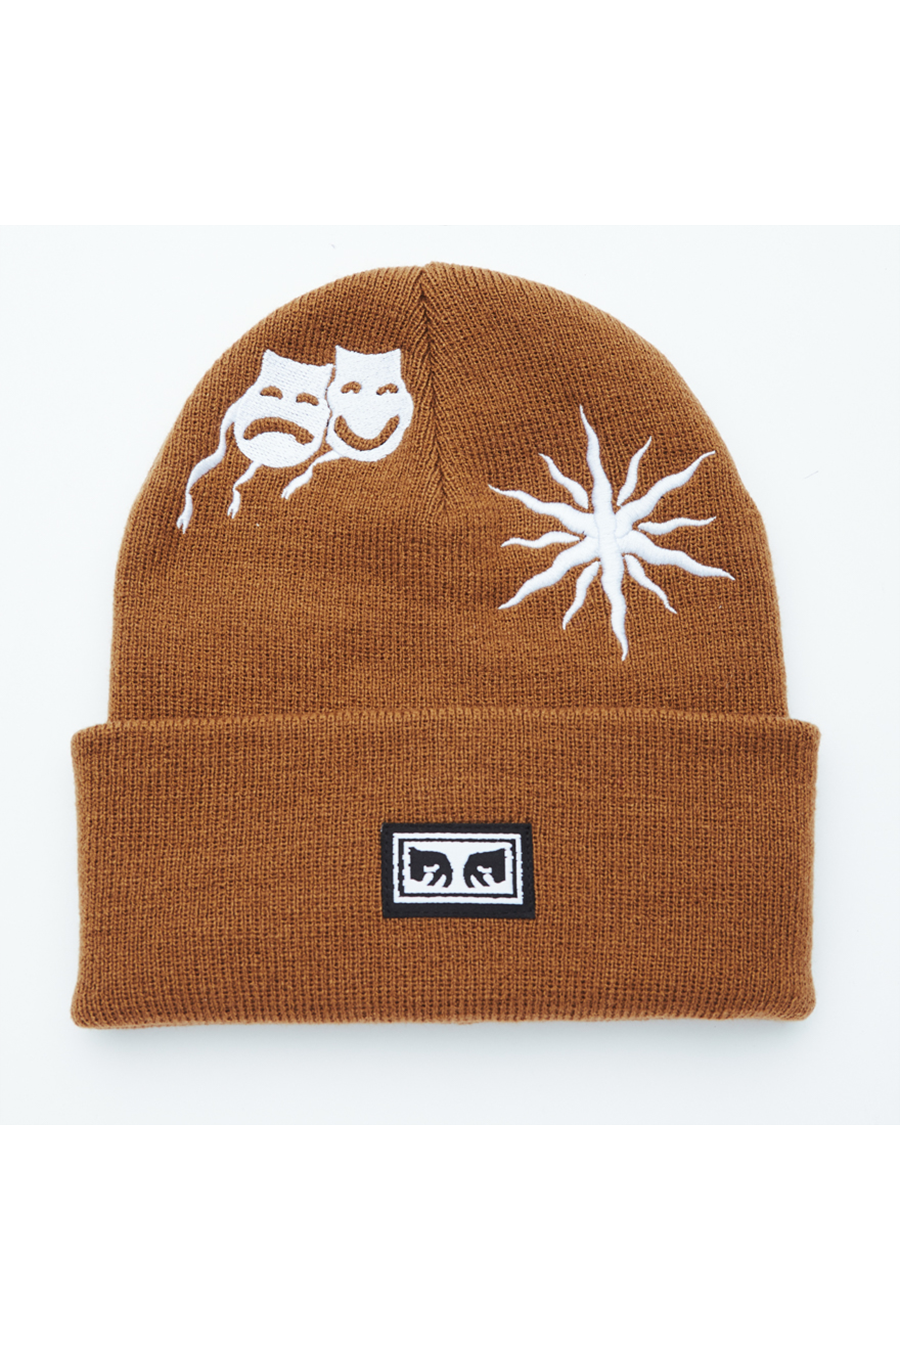 Flash Beanie | Duck Brown - Main Image Number 1 of 2